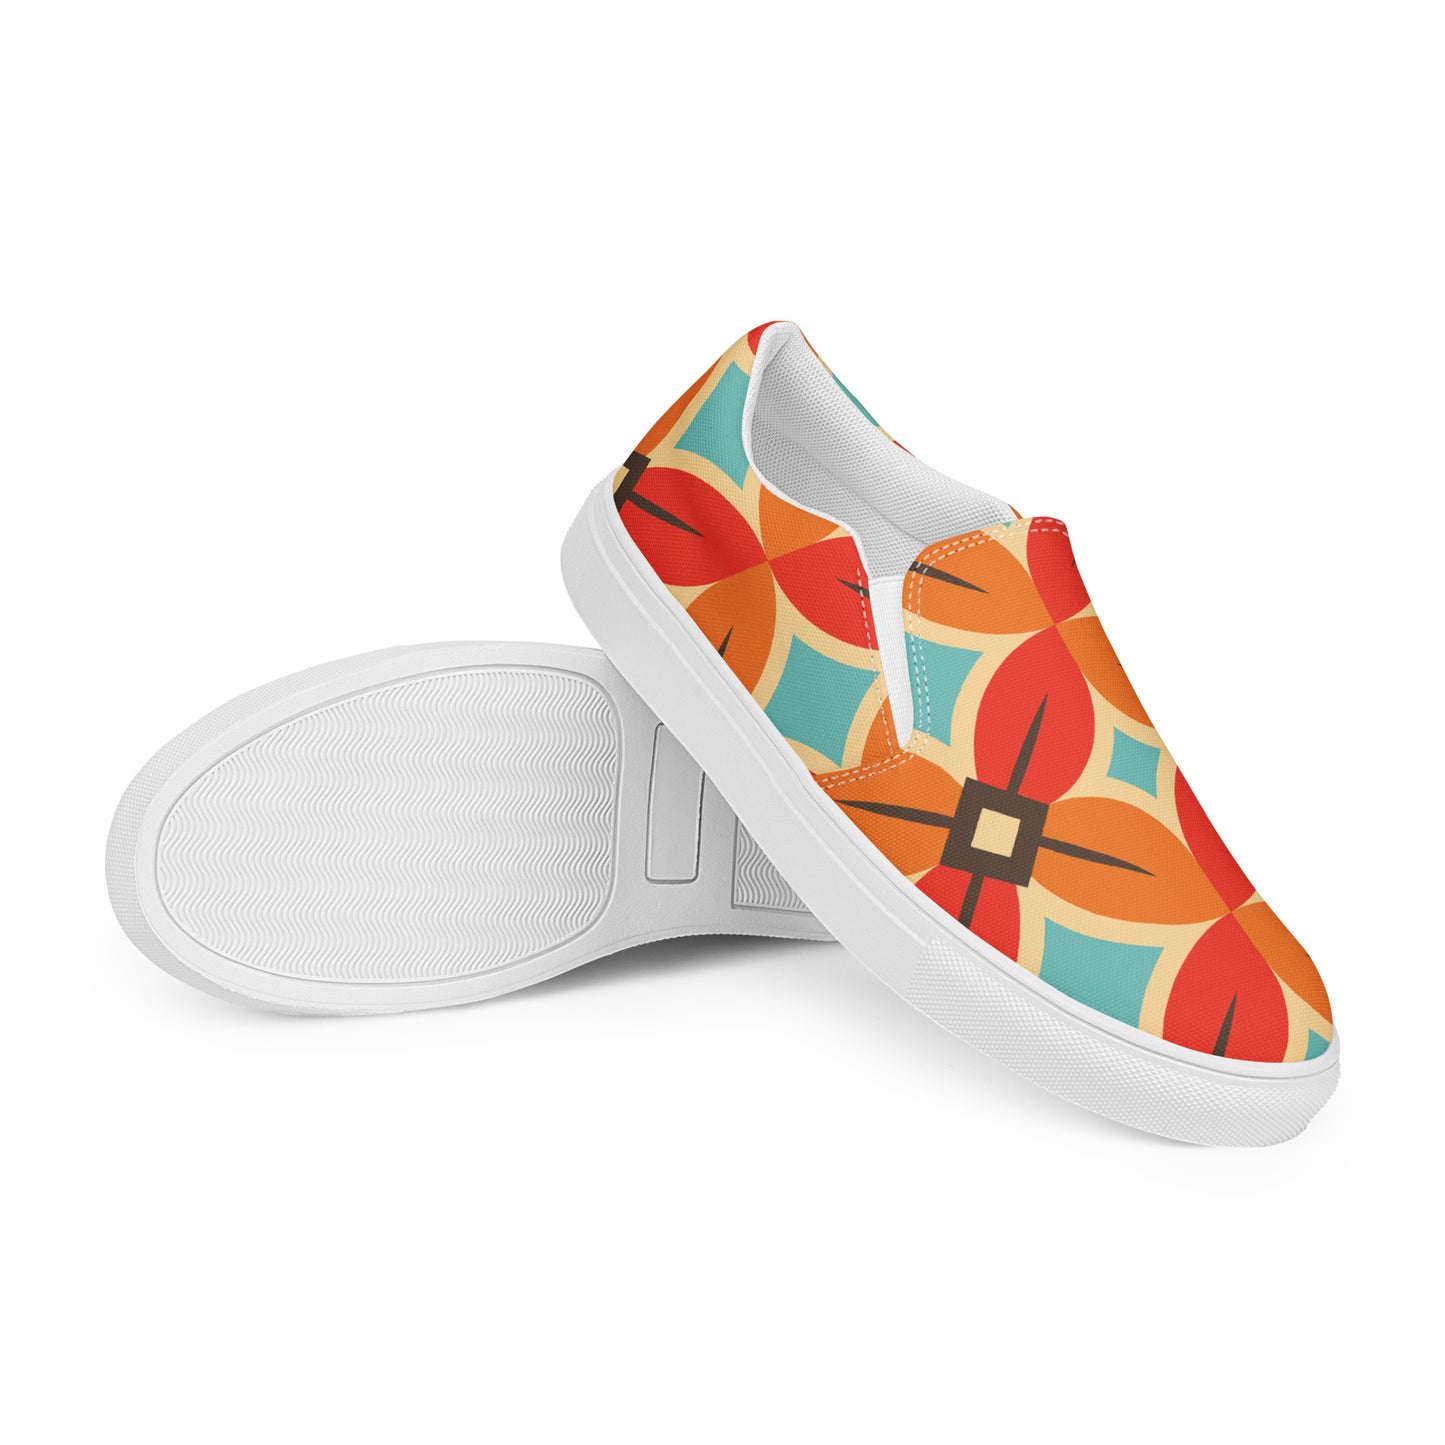 Retro Flower - Sustainably Men’s slip-on canvas shoes